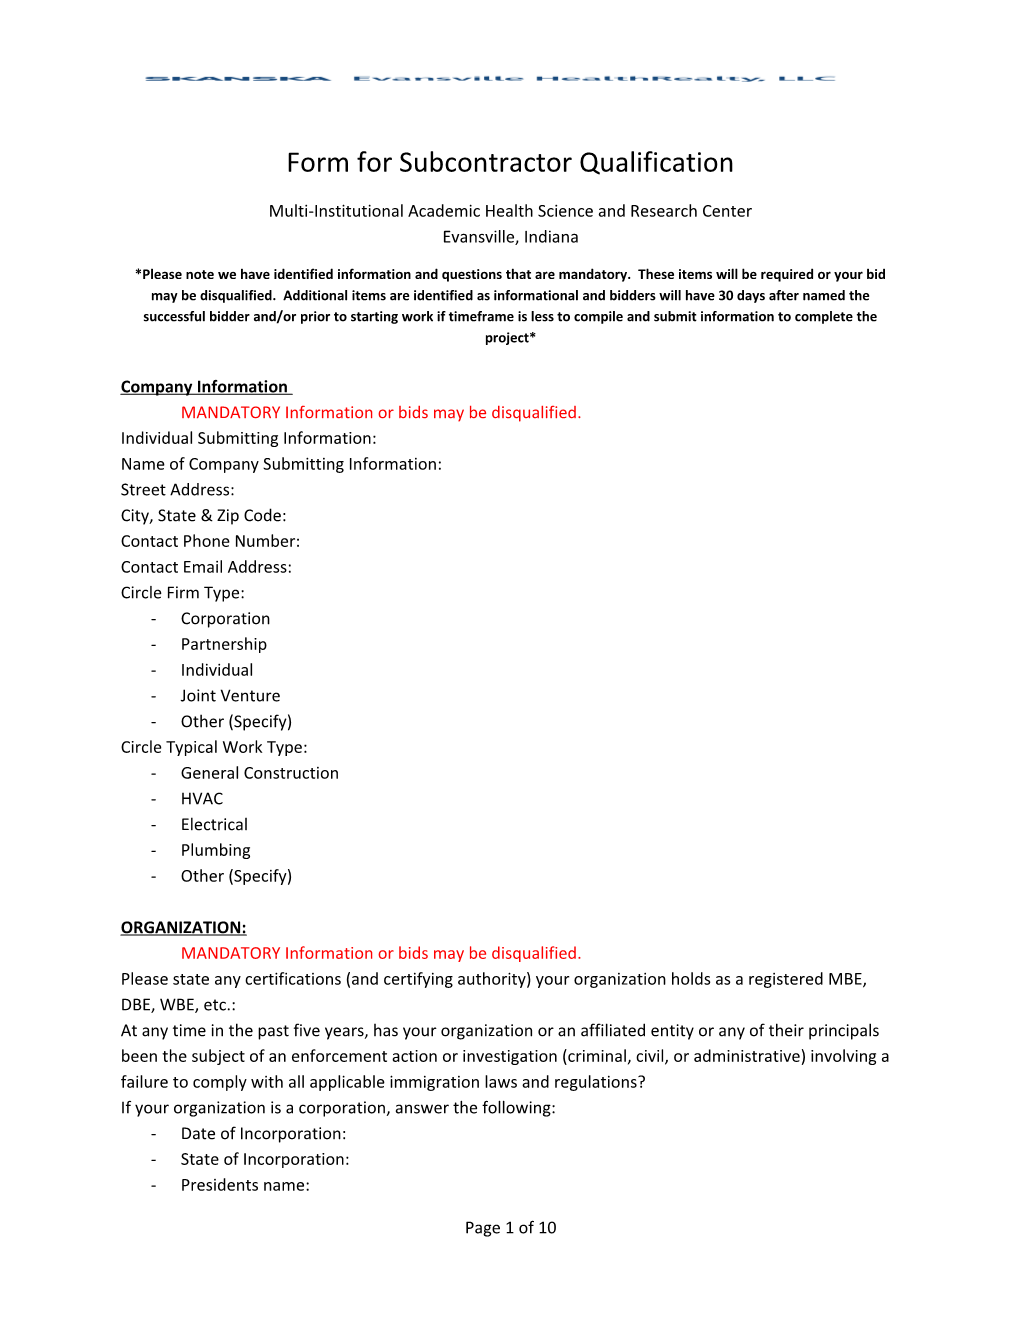 Form for Subcontractor Qualification